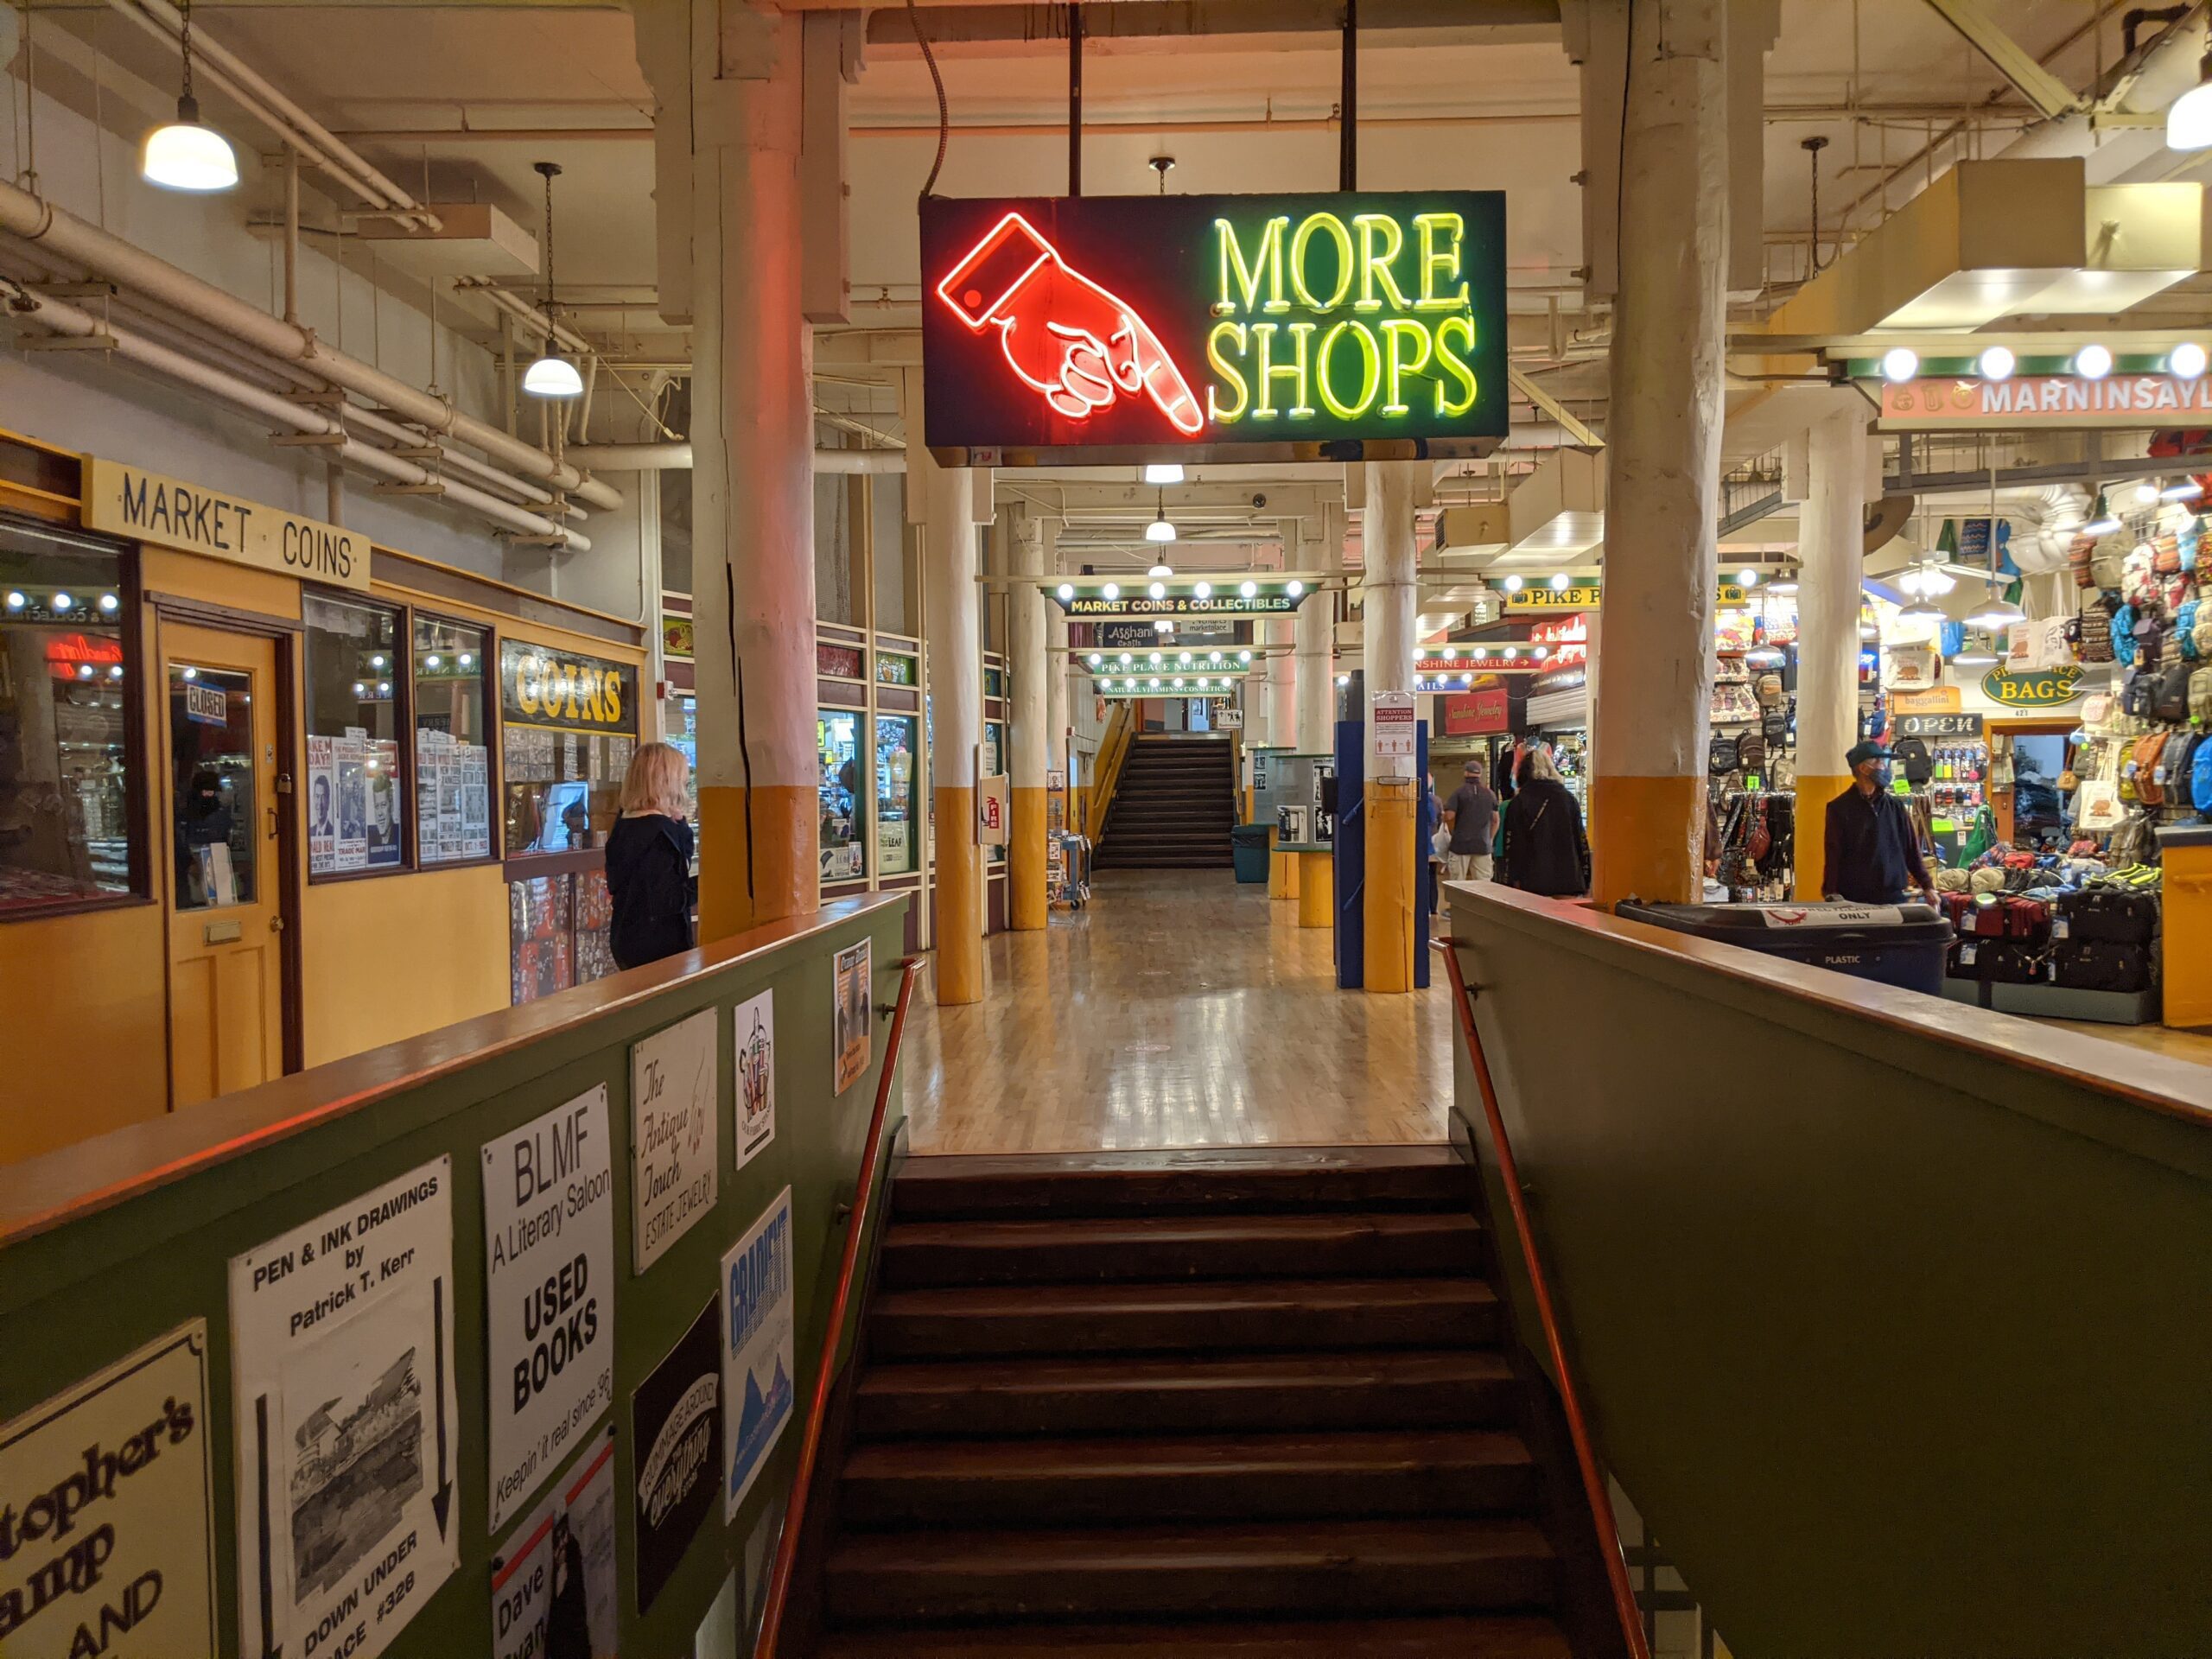 https://www.pikeplacemarket.org/wp-content/uploads/2021/10/pike_place_market-downunder-scaled.jpg